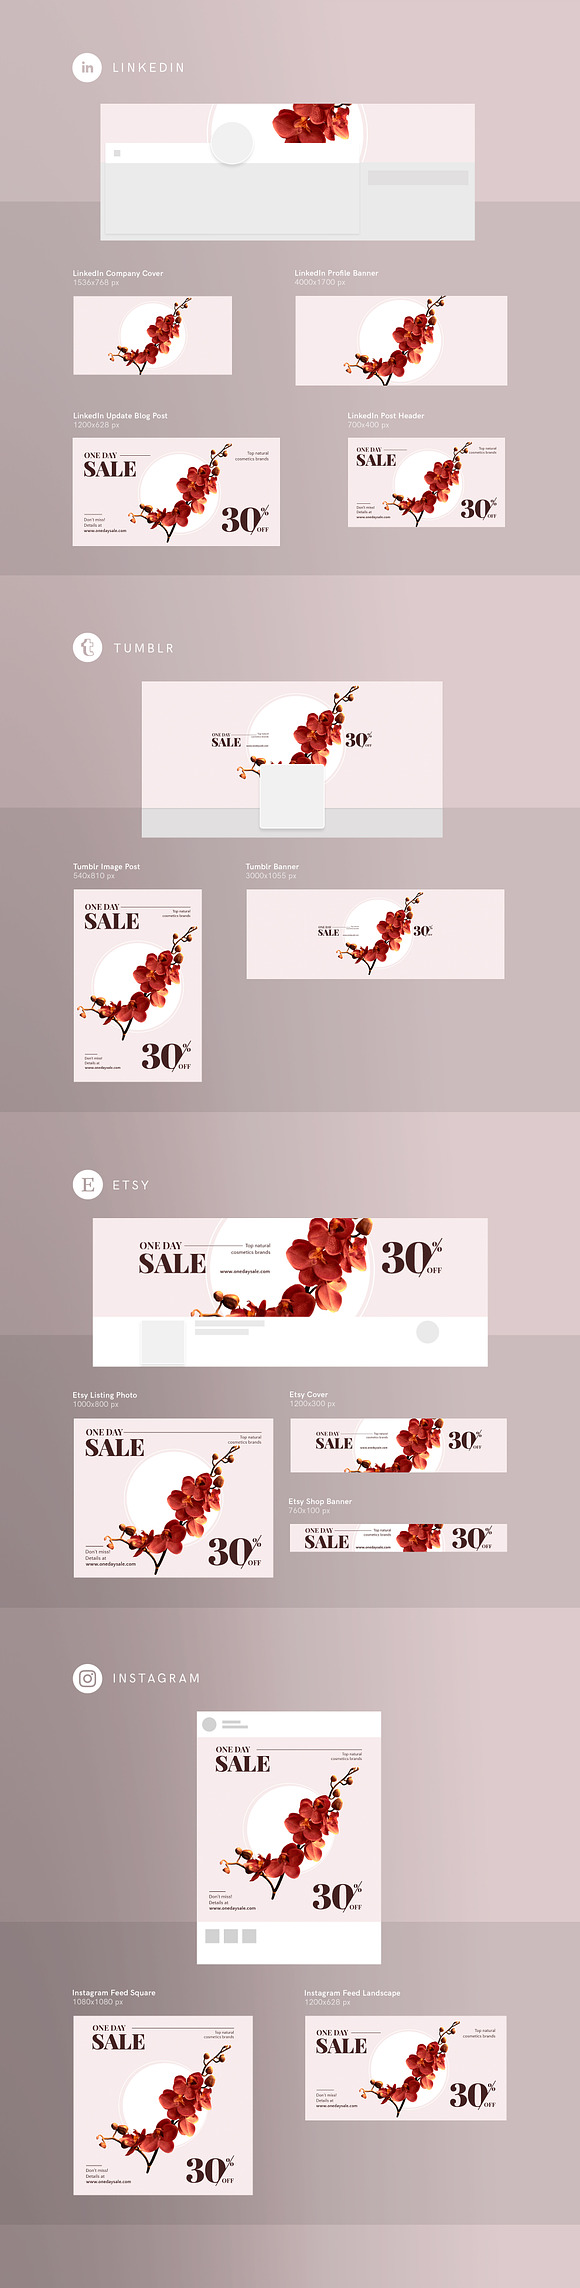 Branding Pack | One Day Sale in Branding Mockups - product preview 8